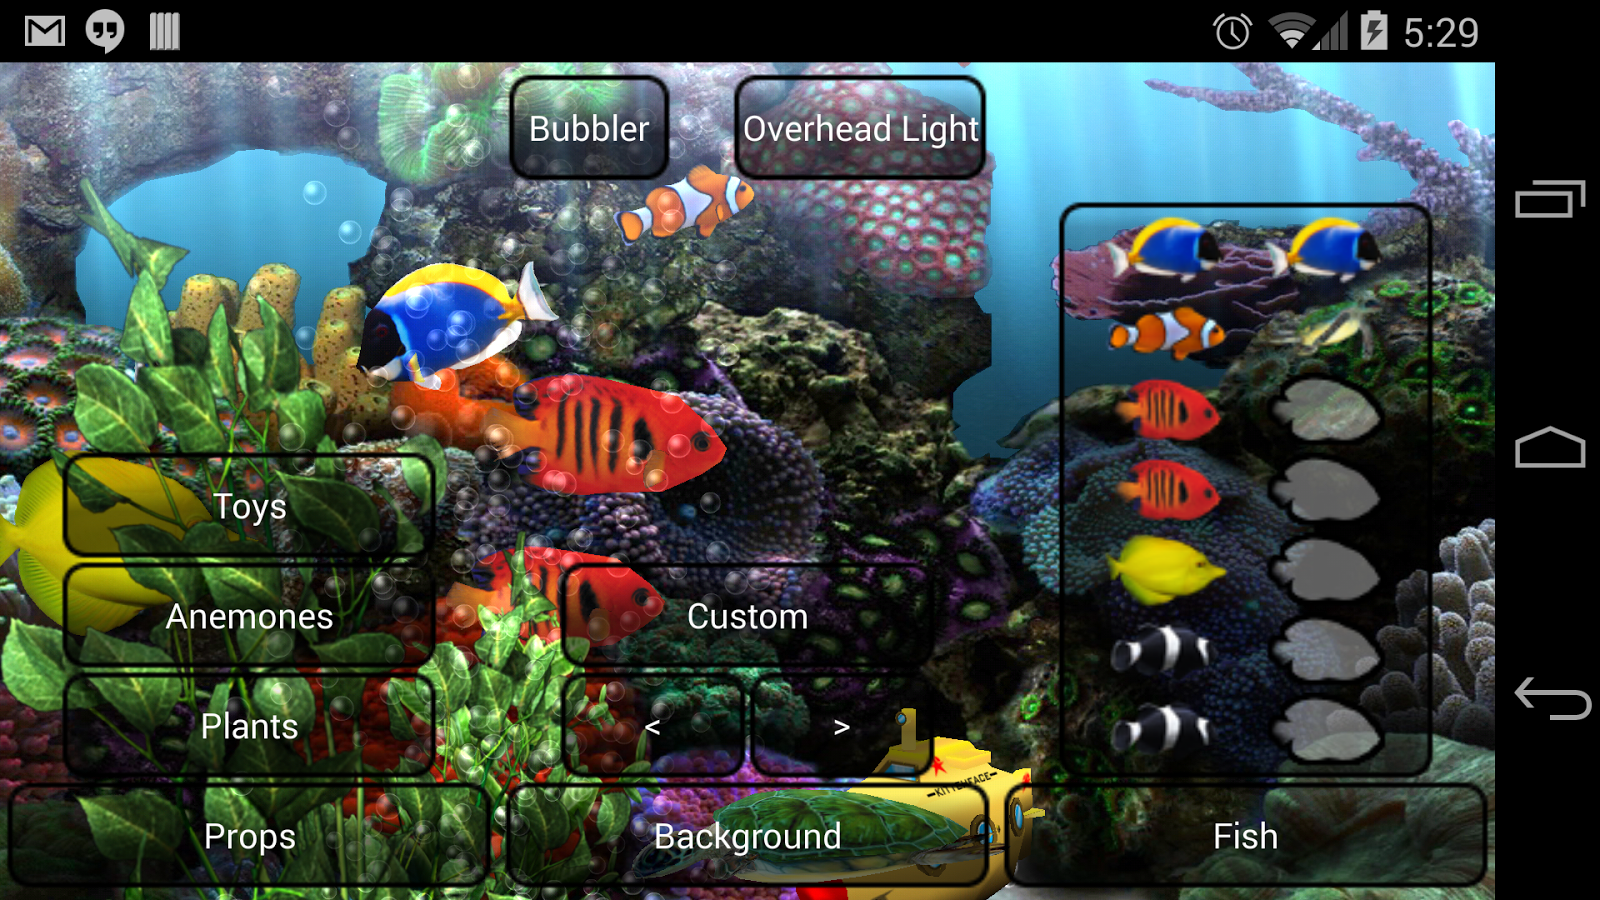 Aquarium Live Wallpaper   Android Apps on Google Play